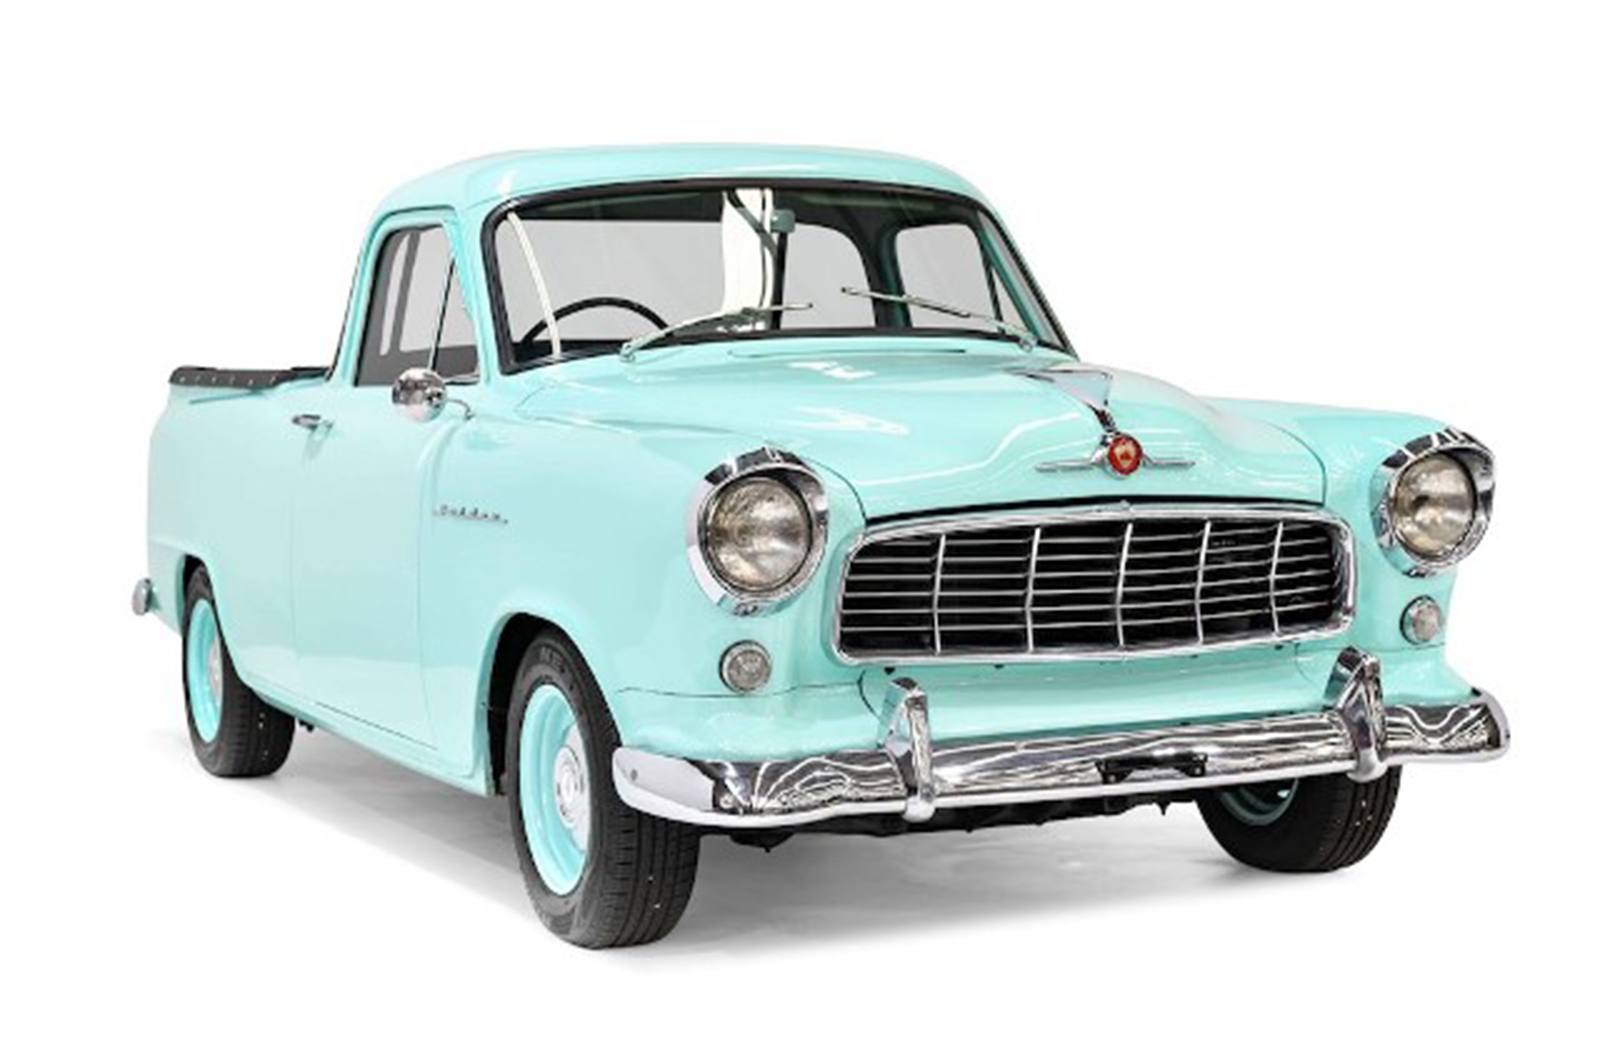 Classic & Sports Car – Entire Australian museum collection for sale next Sunday